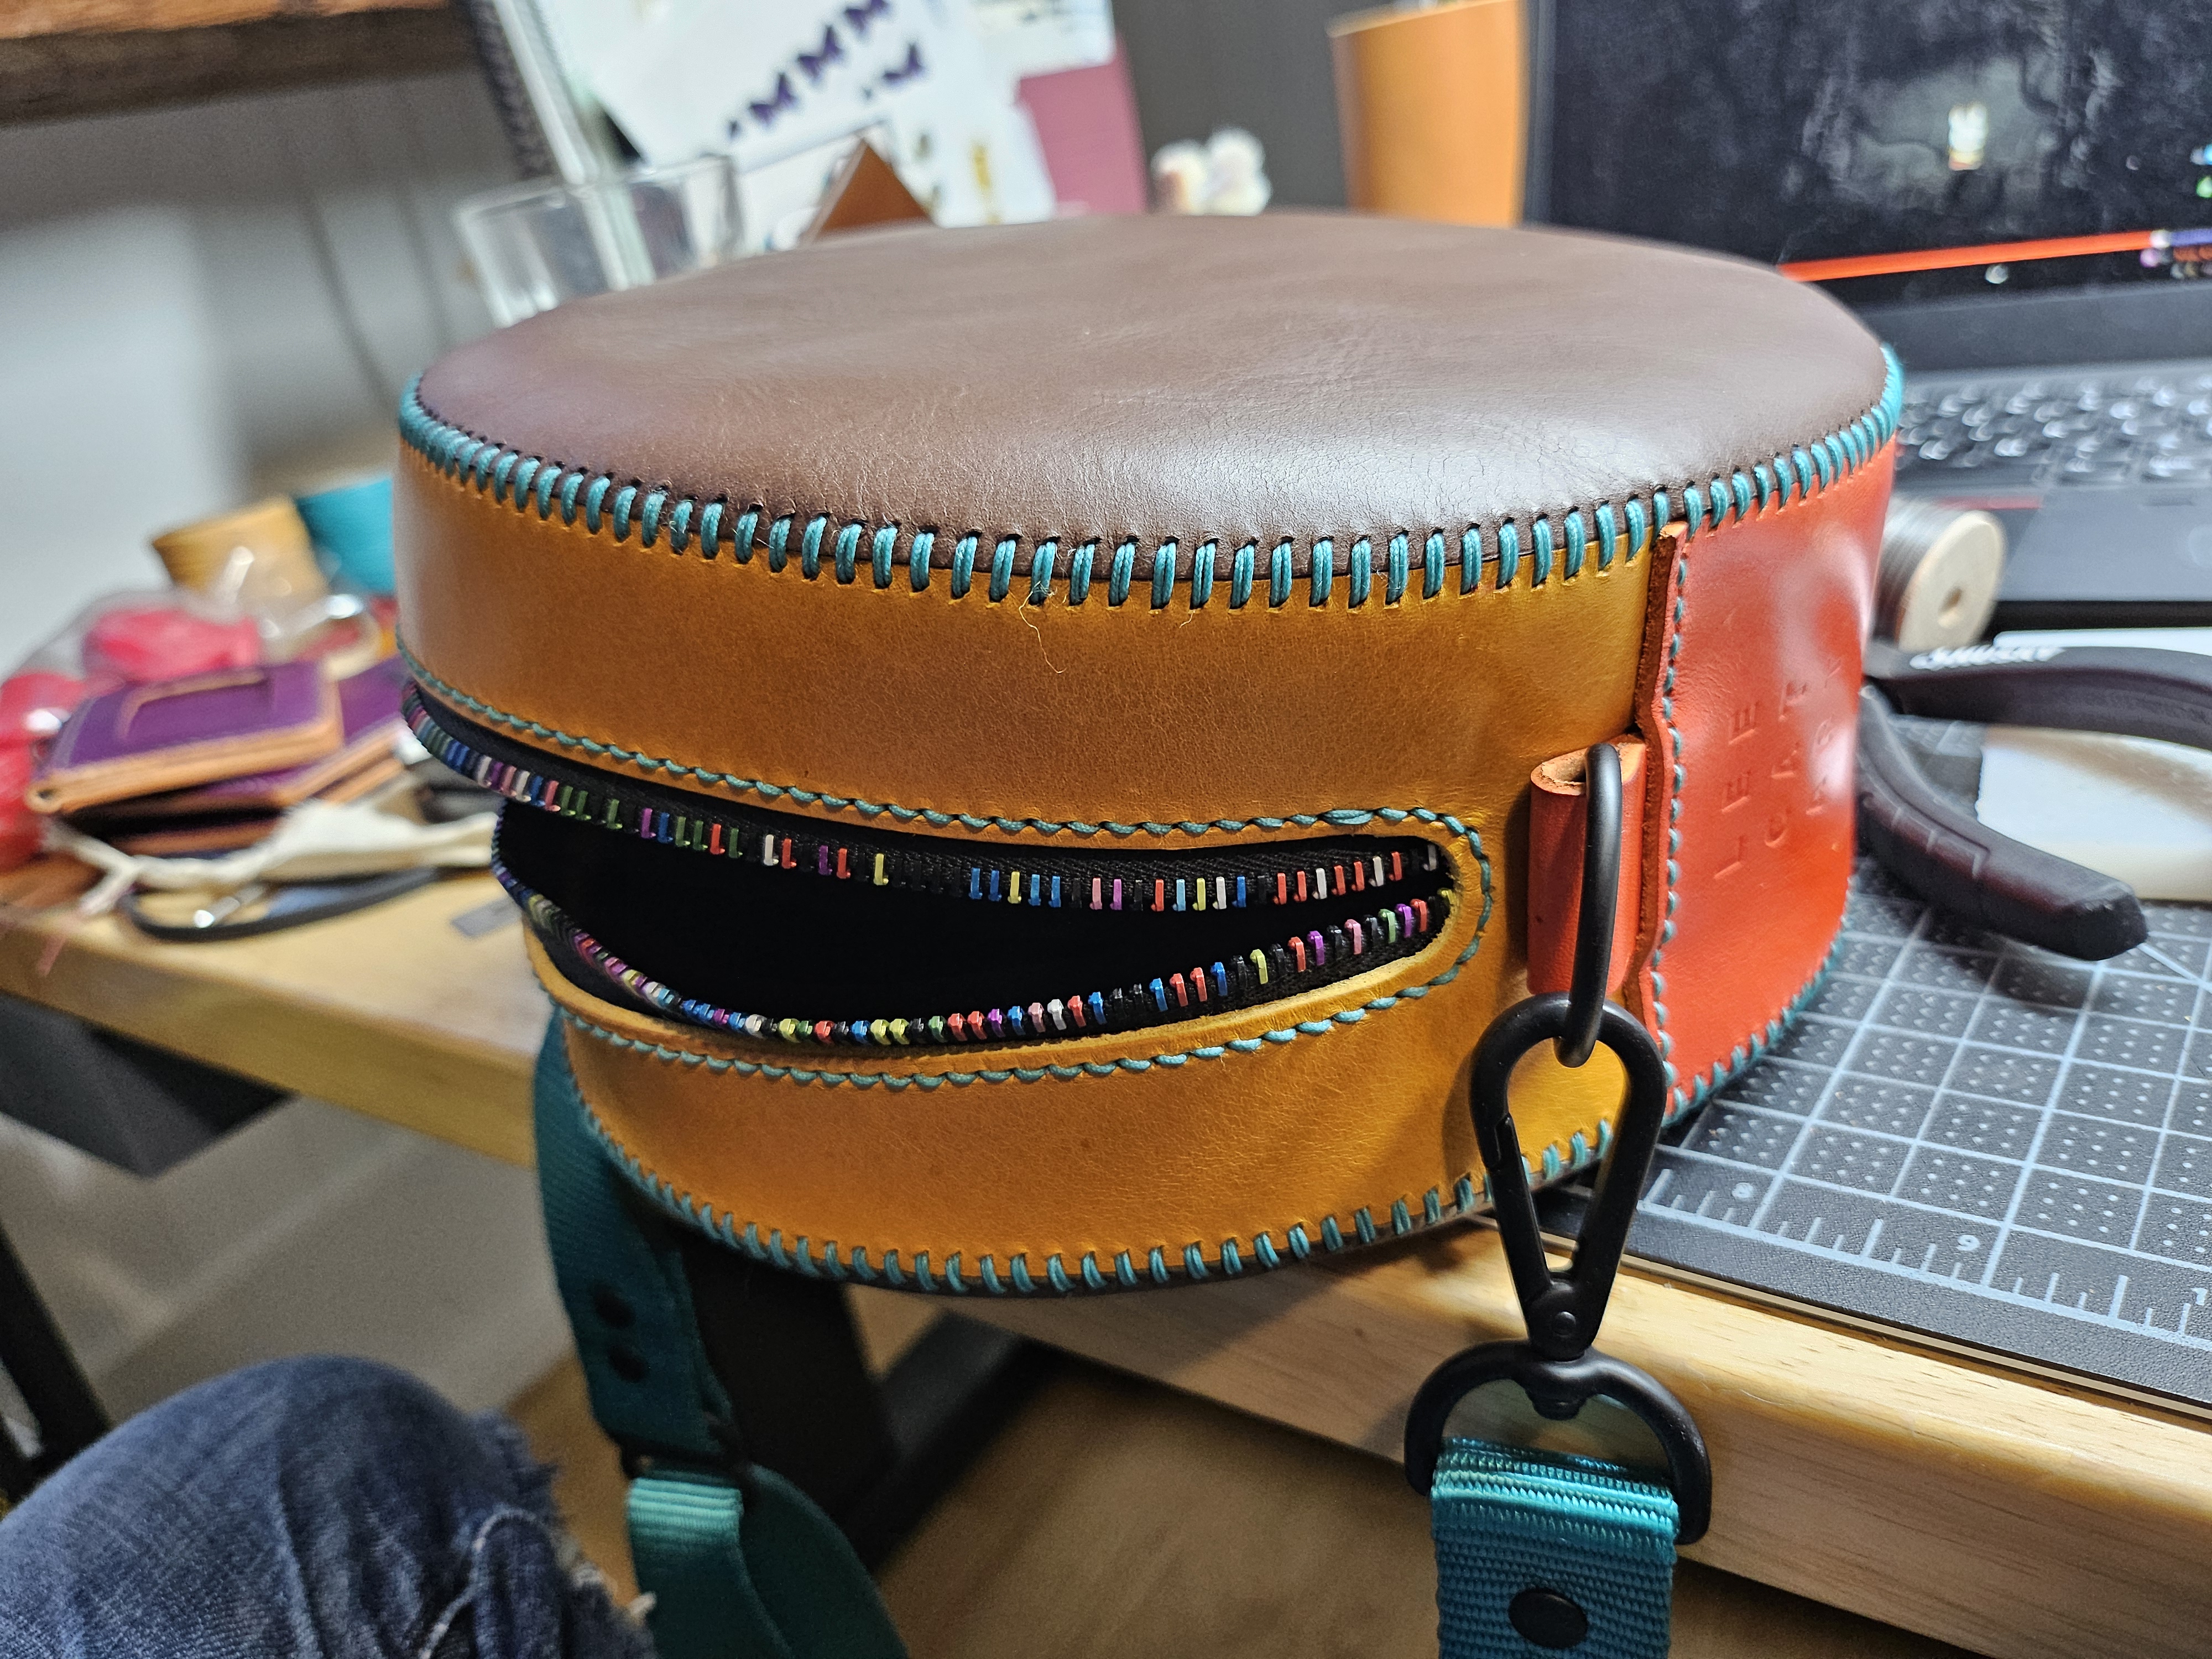 A round bag in brown, mustard yellow, and rich deep orange, with a teal shoulder strap.